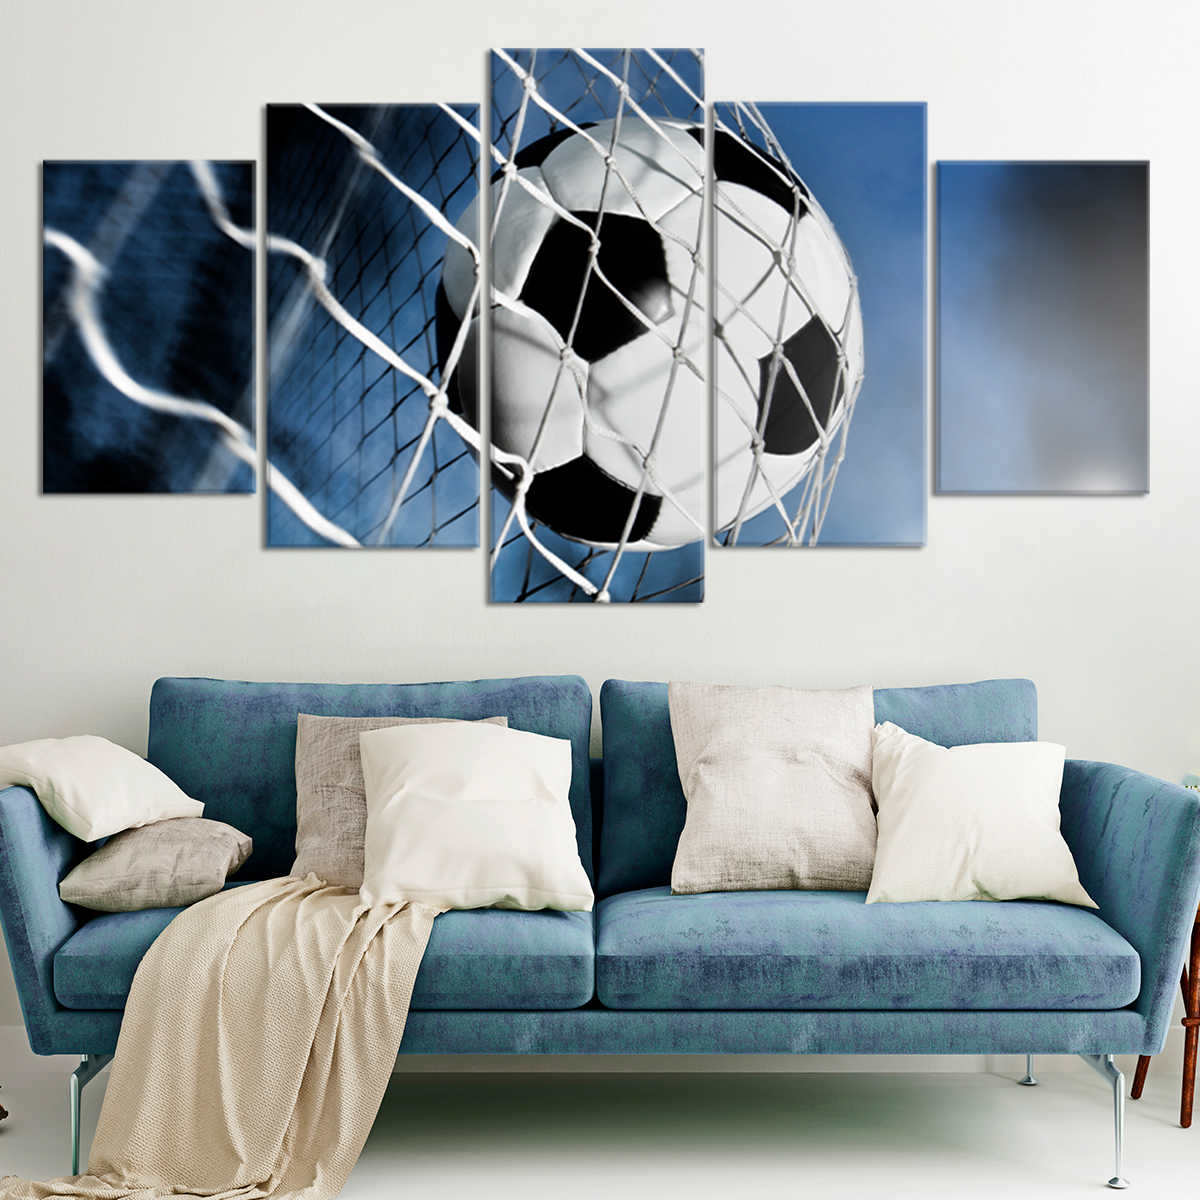 In Wall Art l by Stunning Canvas Prints